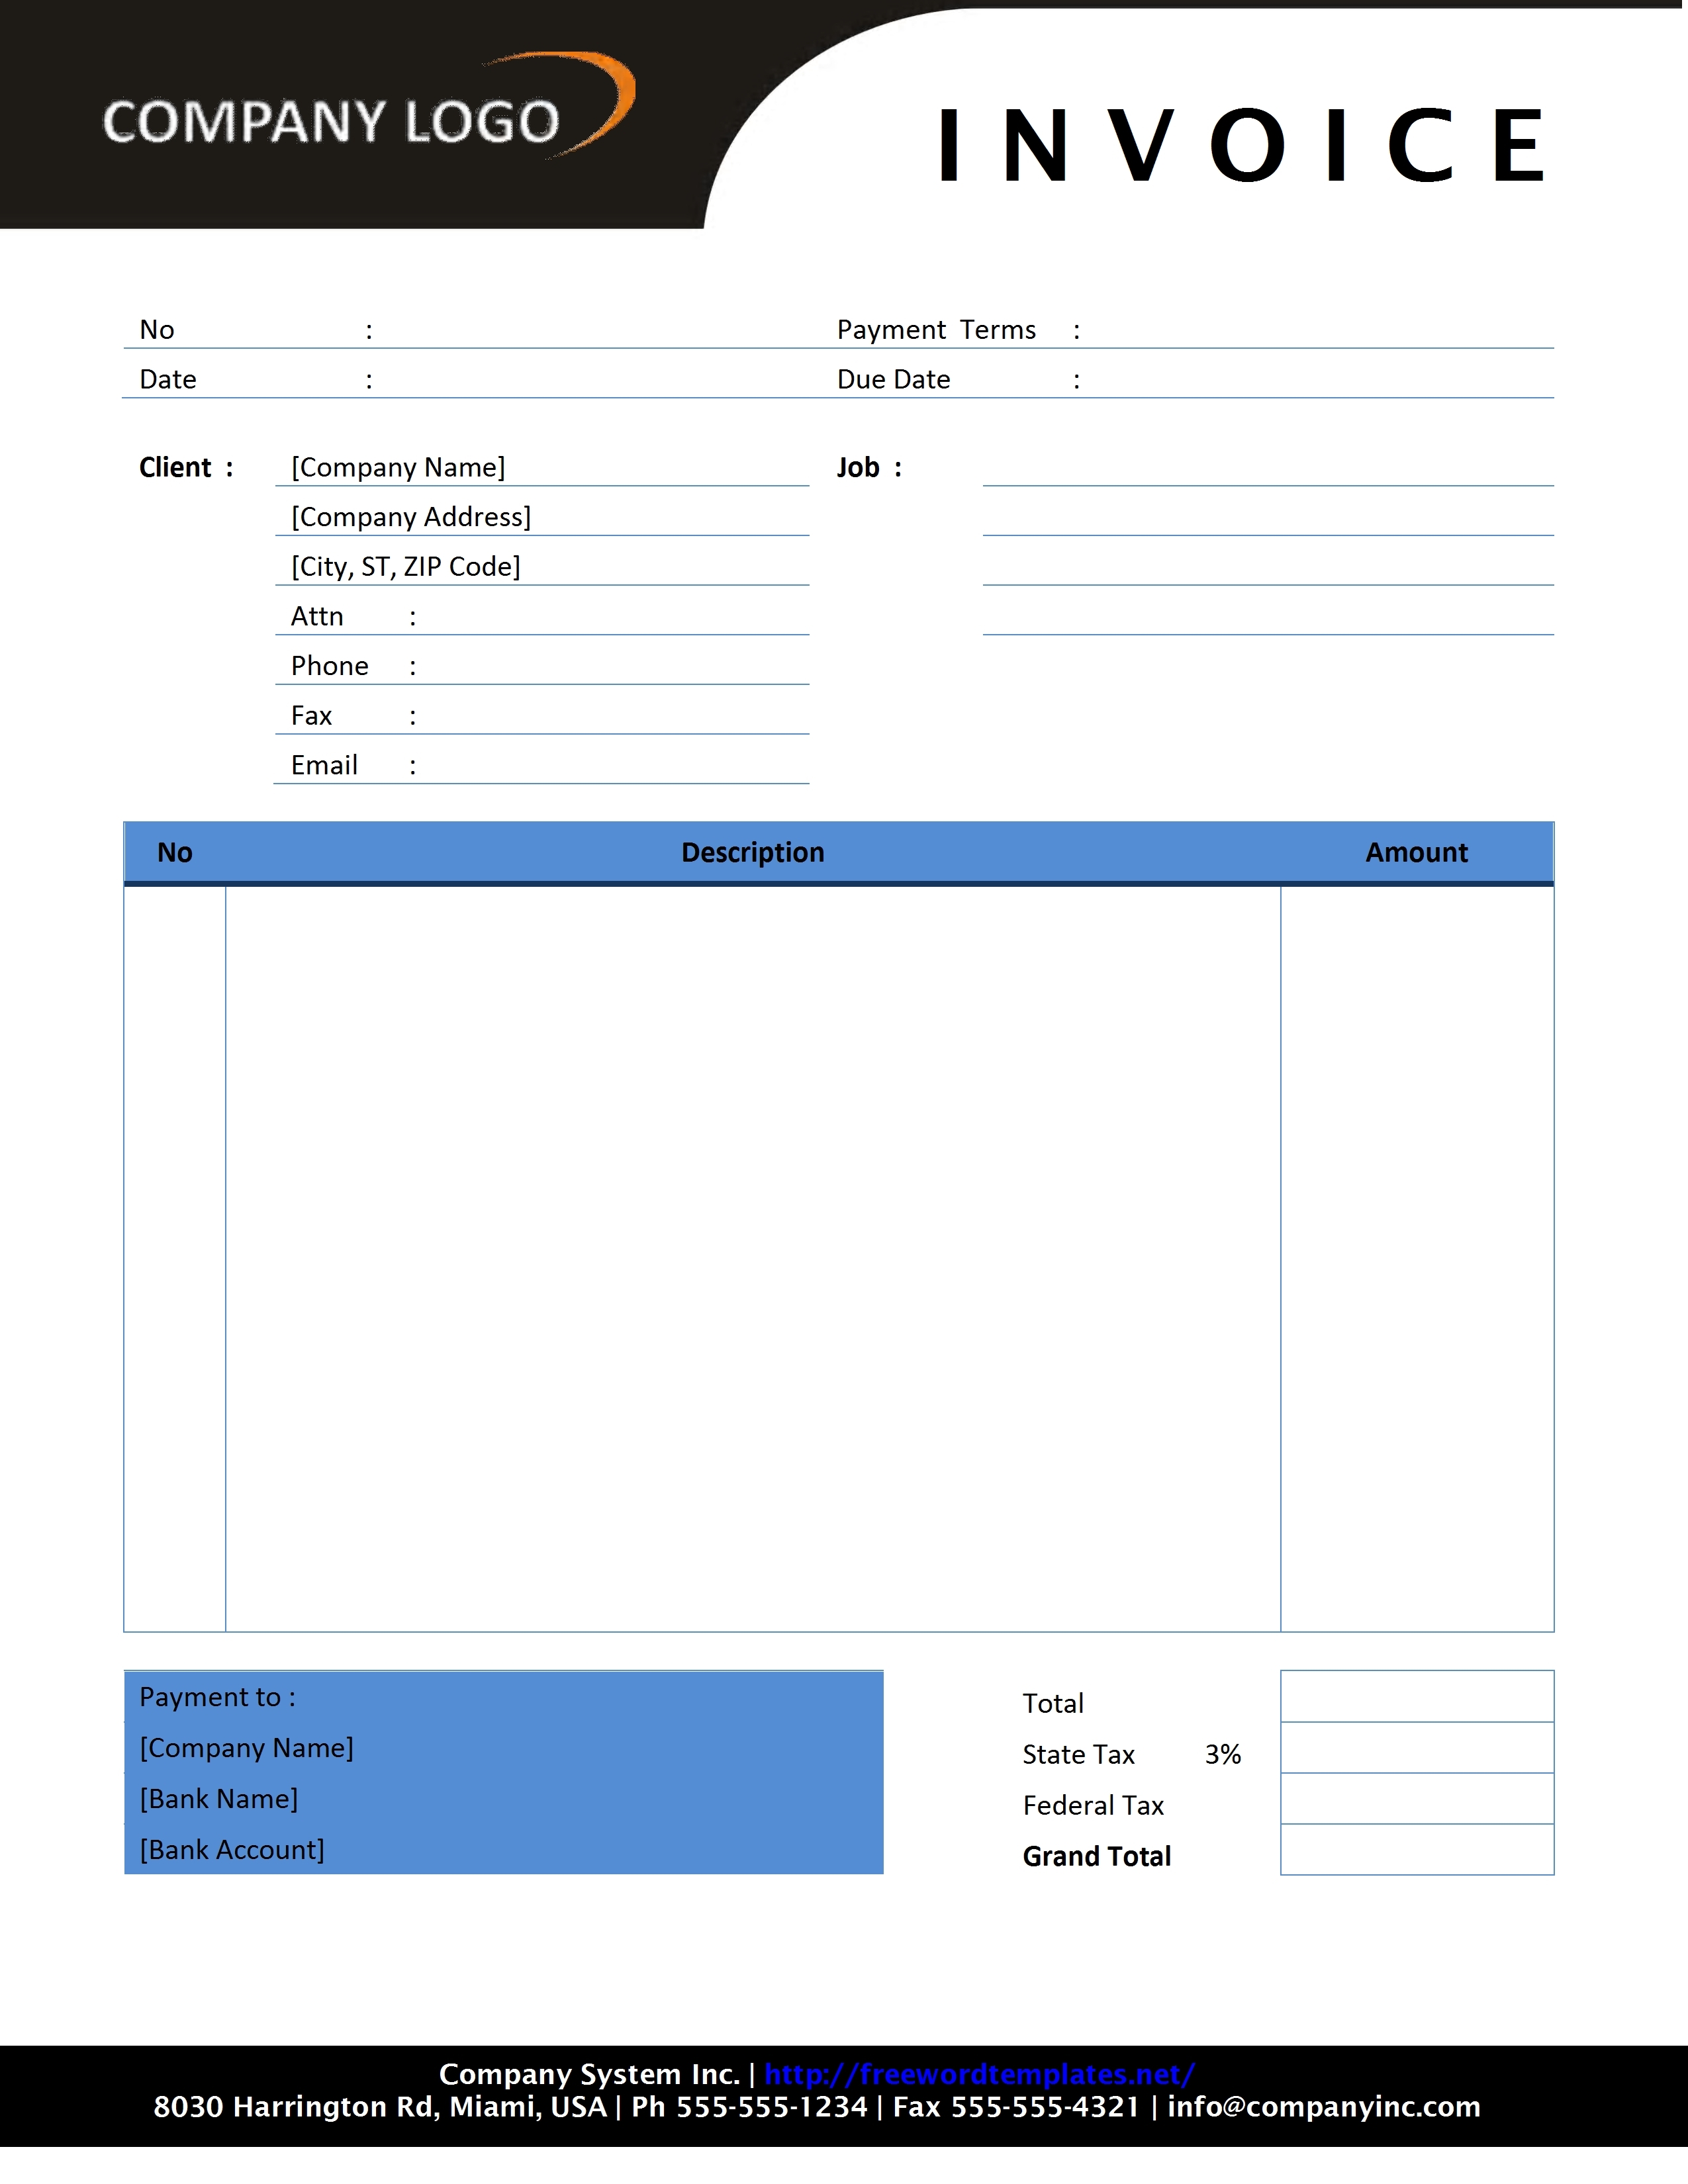 ms word cover page templates free download top invoice templates making an invoice in word